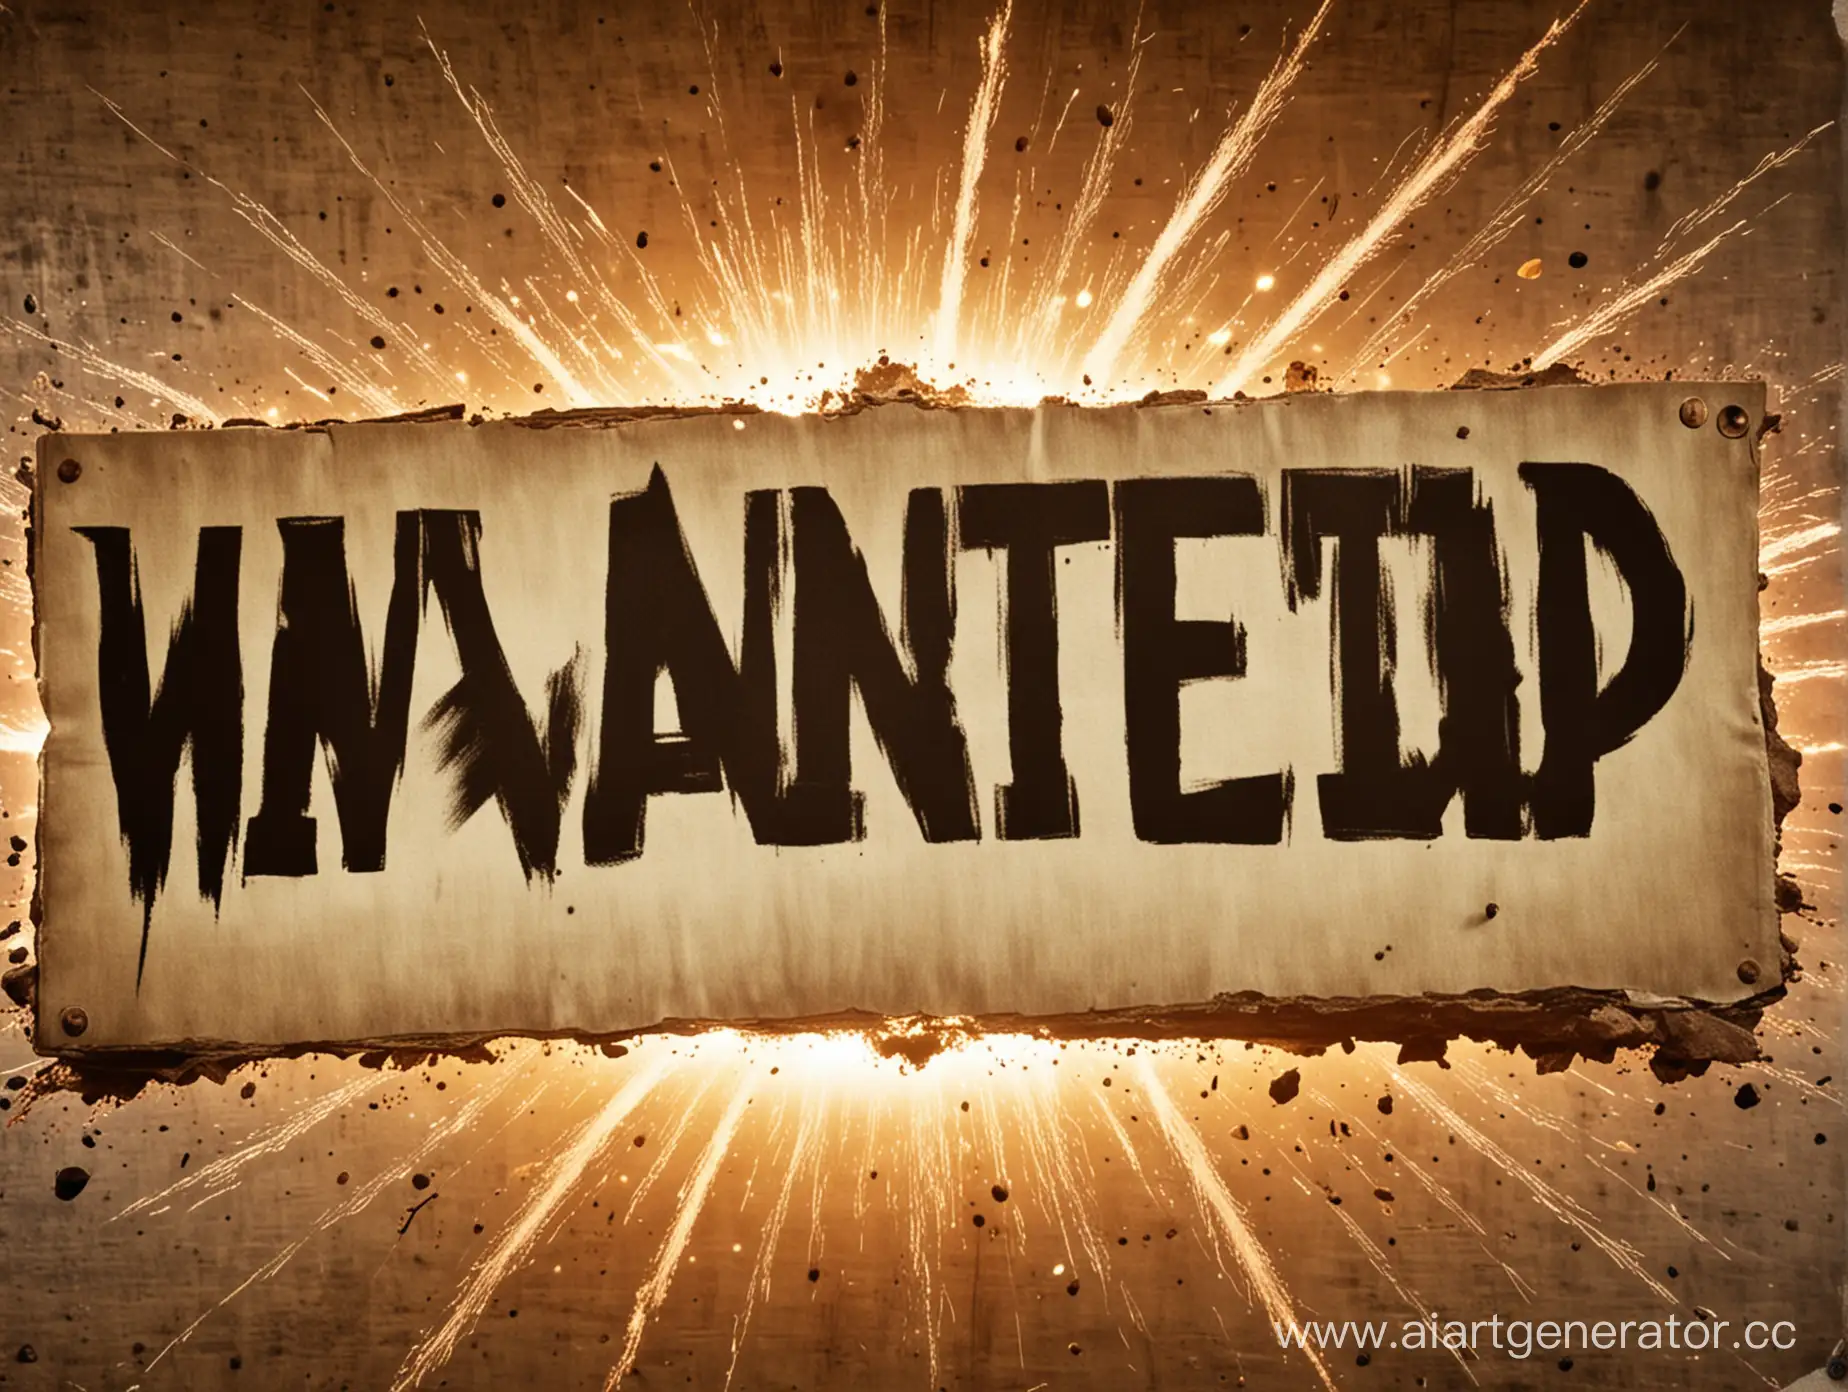 Dynamic-Explosion-with-Central-WANTED-Sign